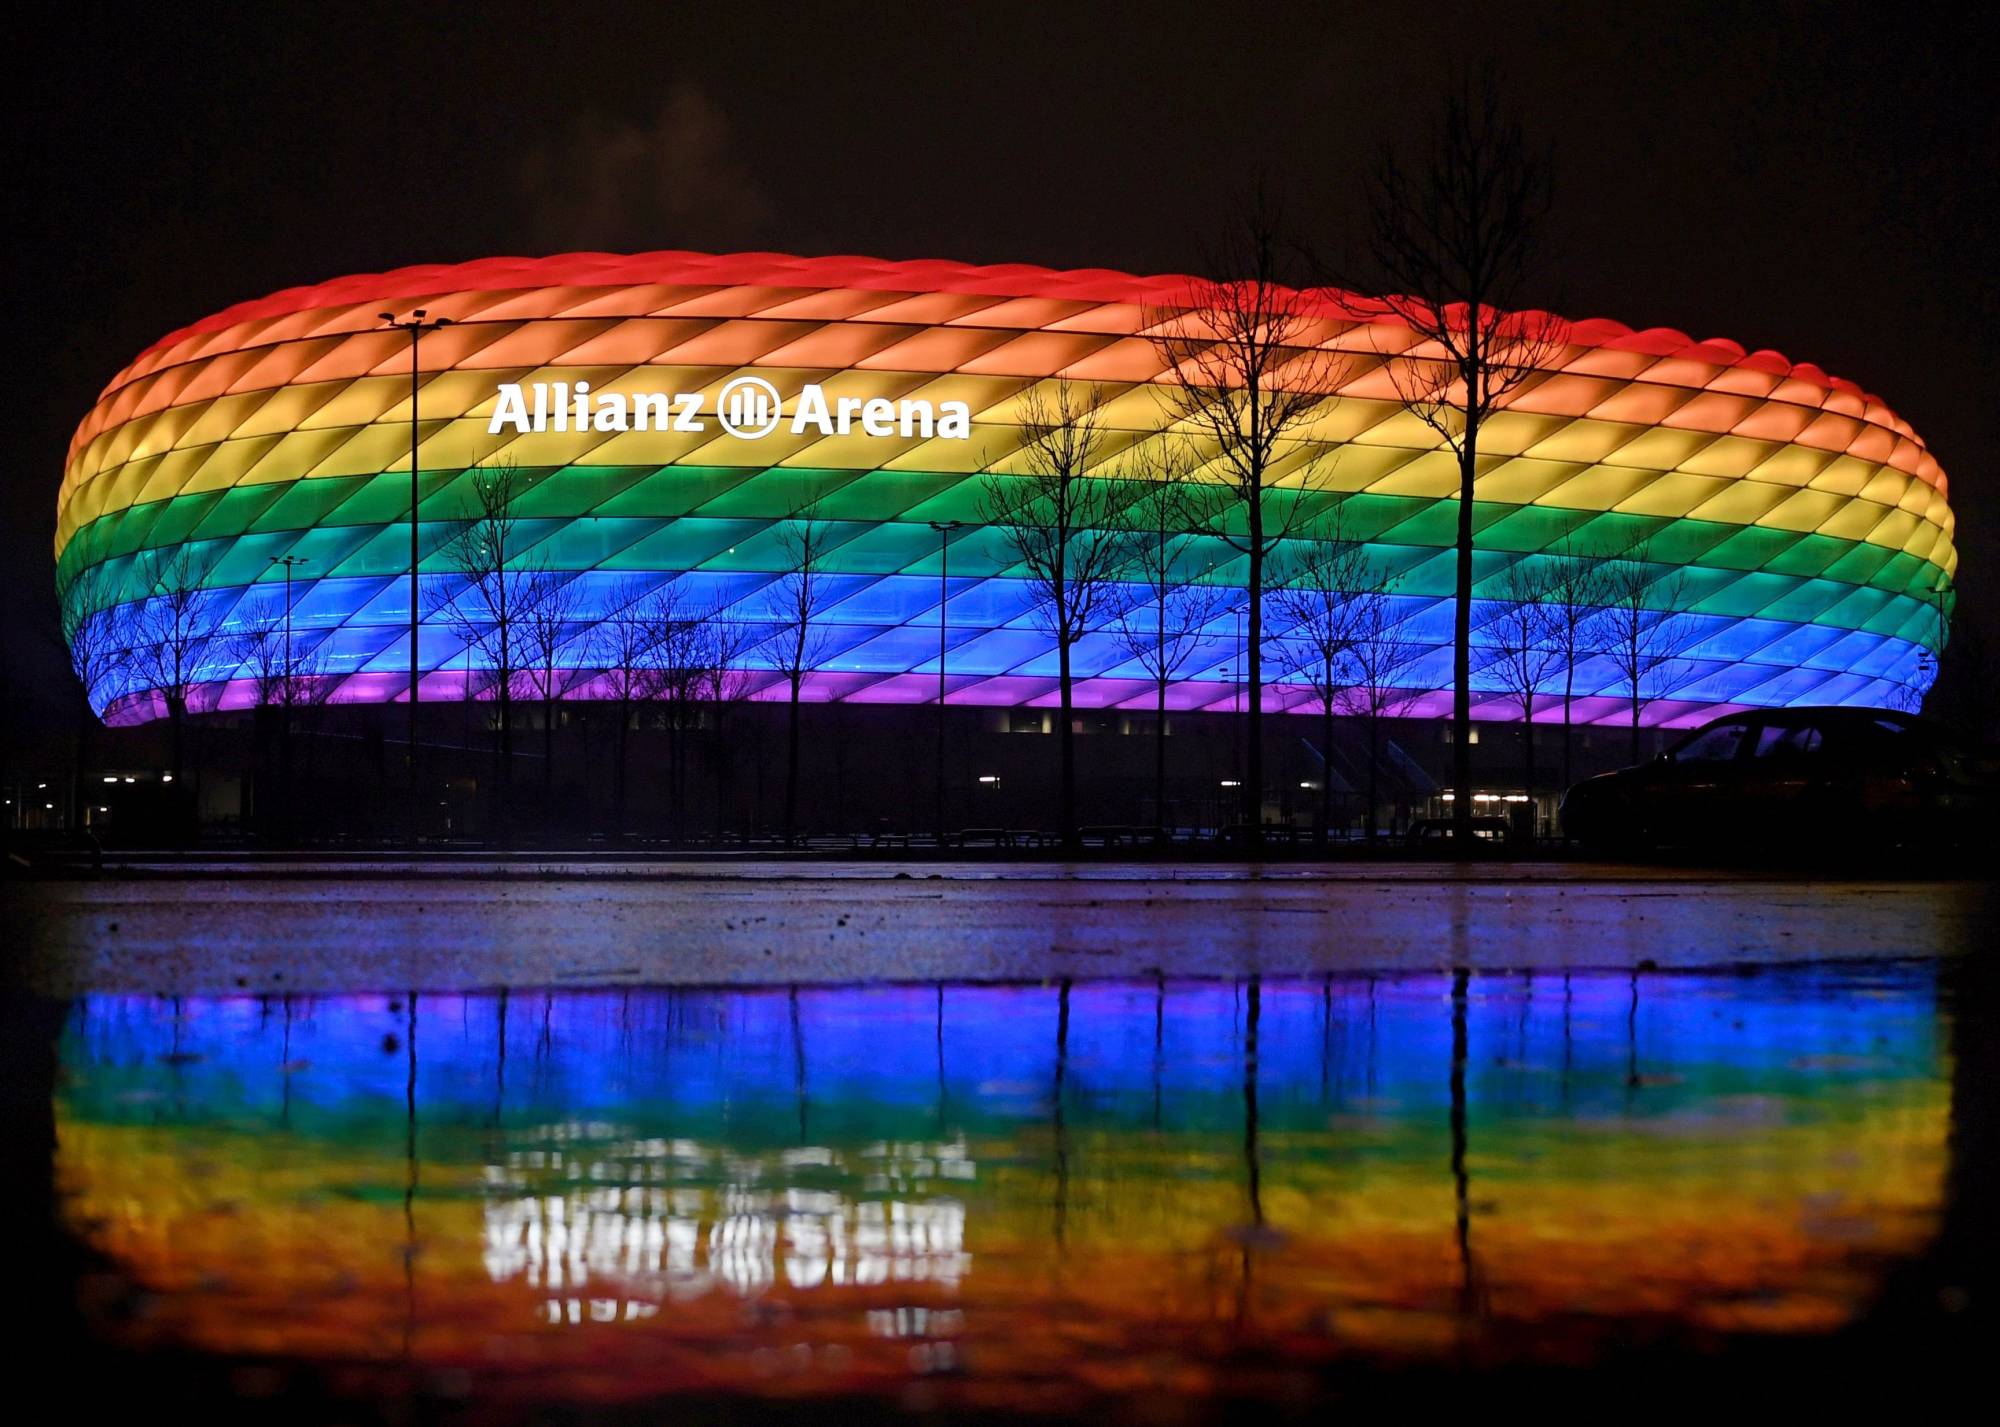 FILE PHOTO: Soccer Football - Bundesliga - Bayern Munich v TSG 1899 Hoffenheim - Allianz Arena, Munich, Germany - January 30, 2021 General view outside the stadium in rainbow colours after the match Pool via REUTERS/Andreas Gebert DFL regulations prohibit any use of photographs as image sequences and/or quasi-video./File Photo - RC2INN9J5BKN